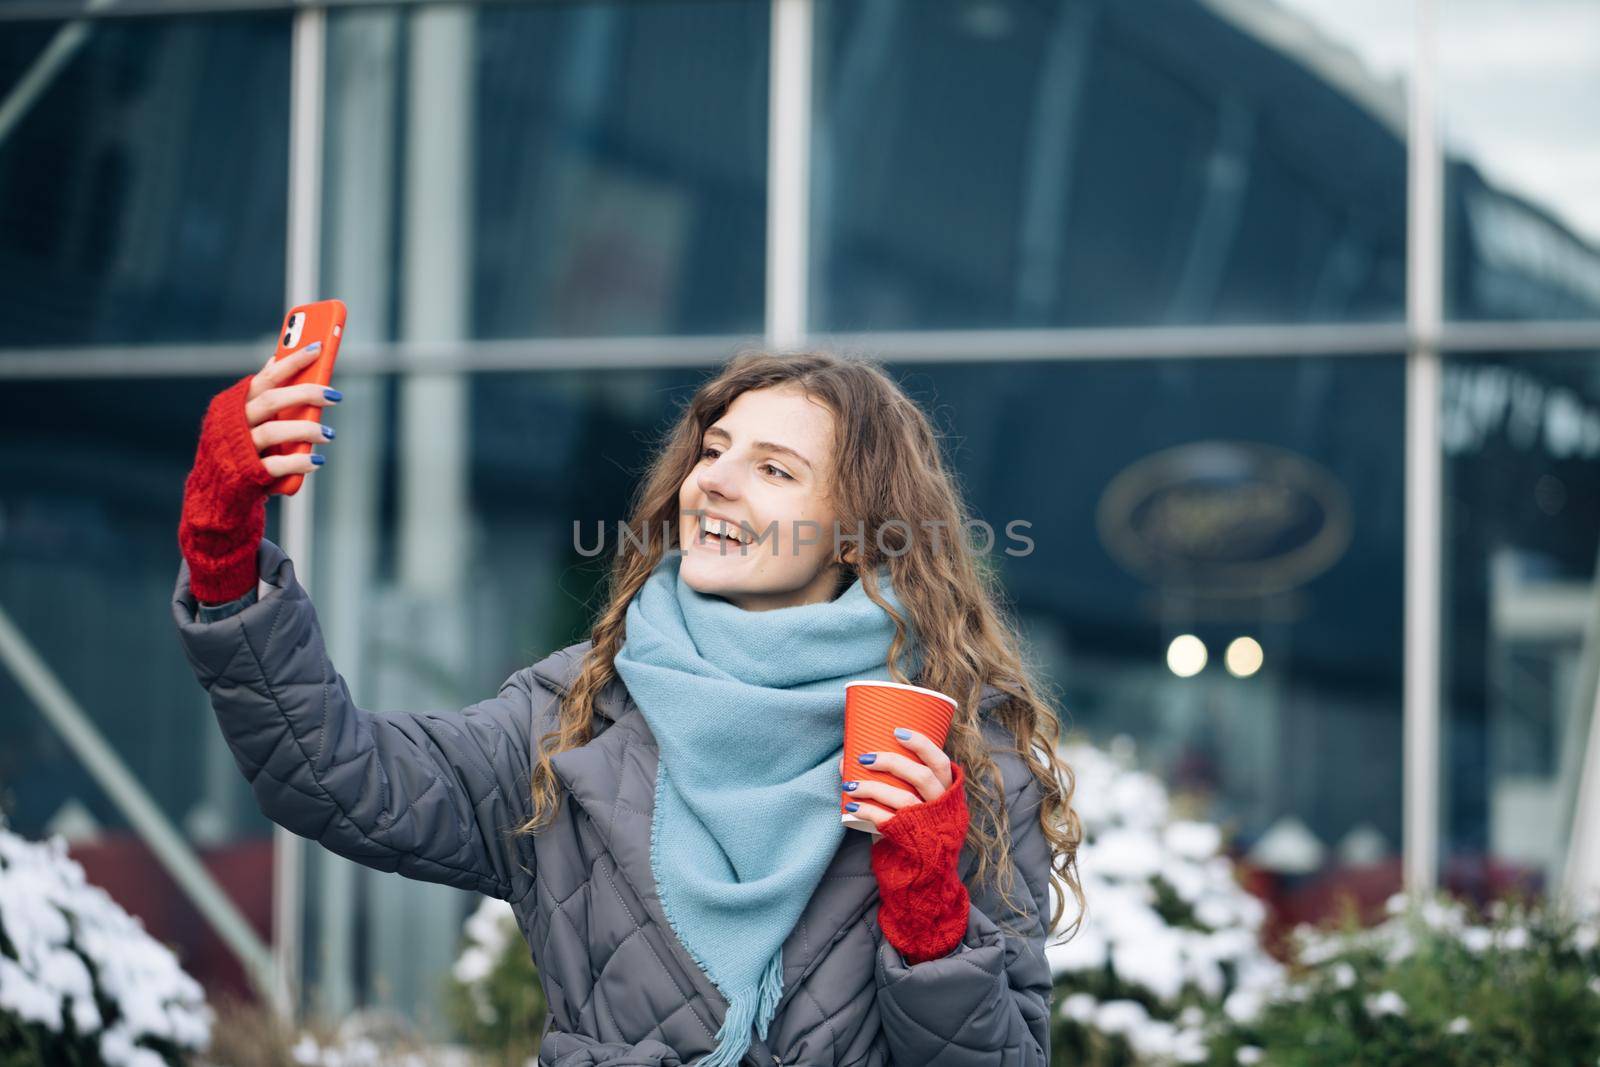 Portrait of happy girl taking selfie holding camera at city street. Modern technology, lifestyle and joyful people concept.